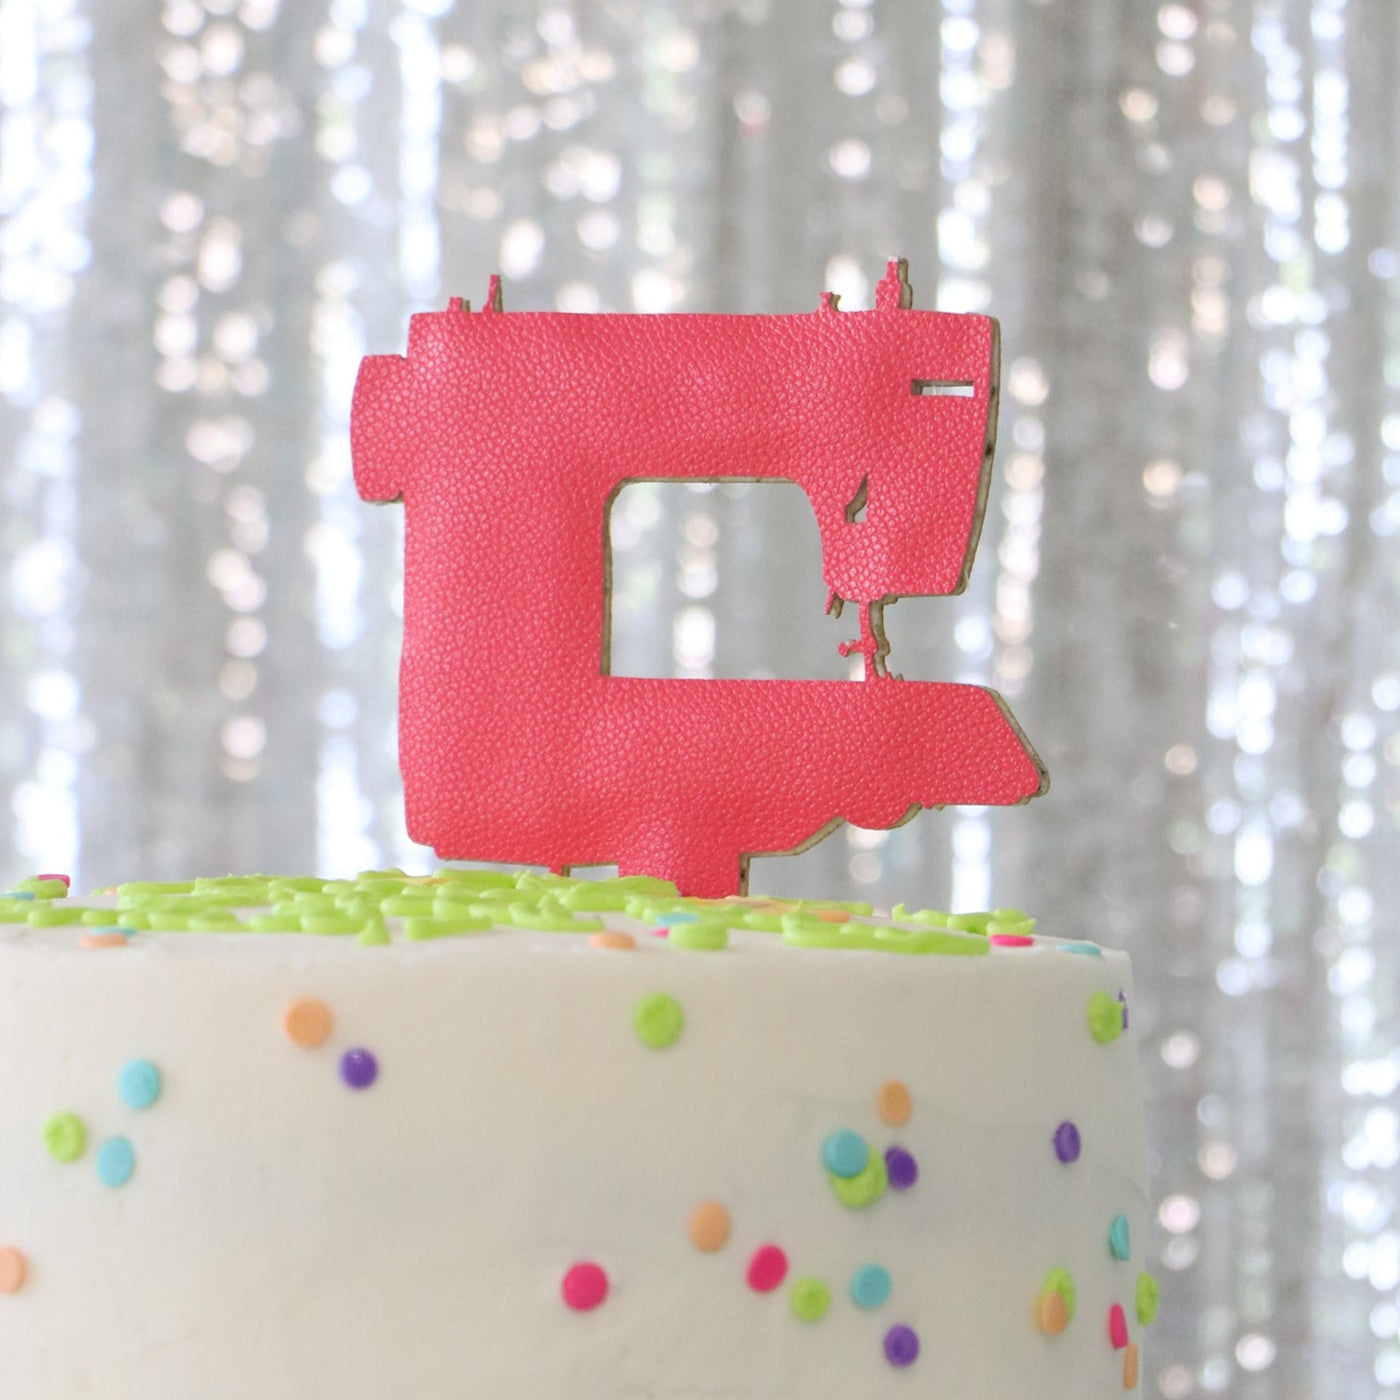 Free! Sewing Machine Cake Topper Instant Download with SVG Files